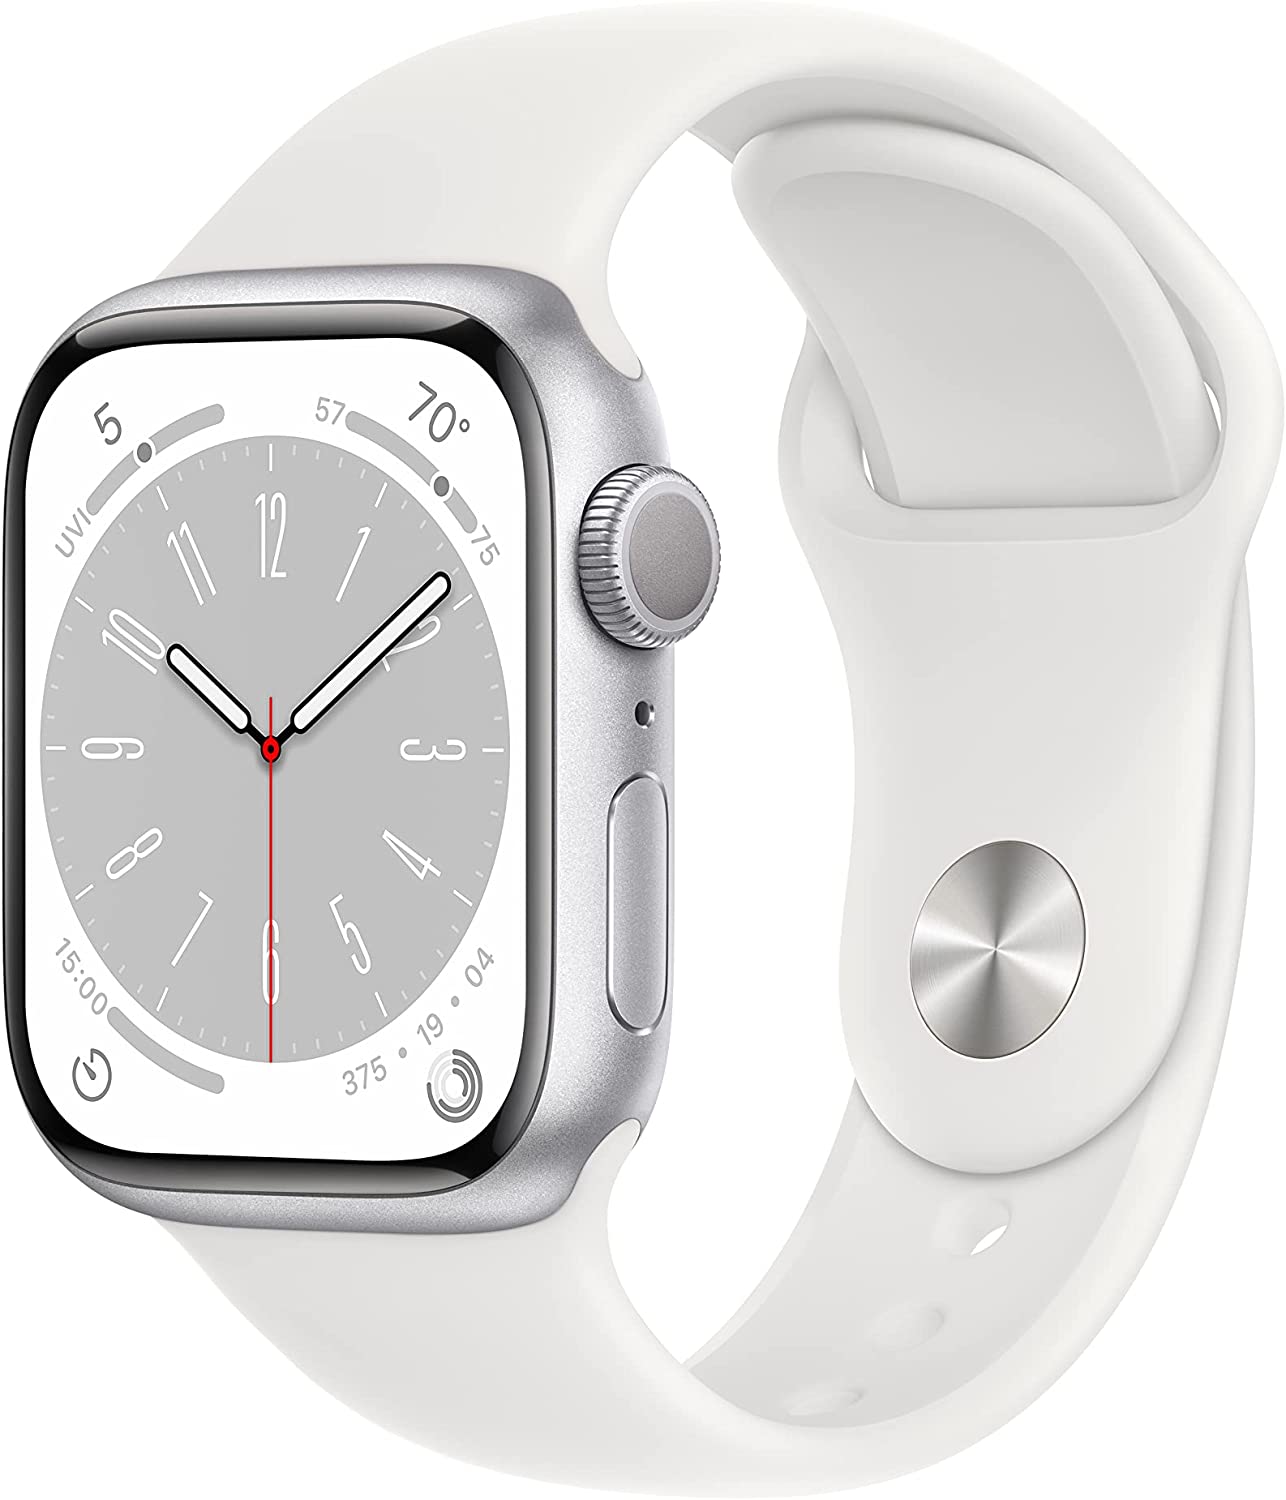 Apple Watch Series 8 with smart features no cellular